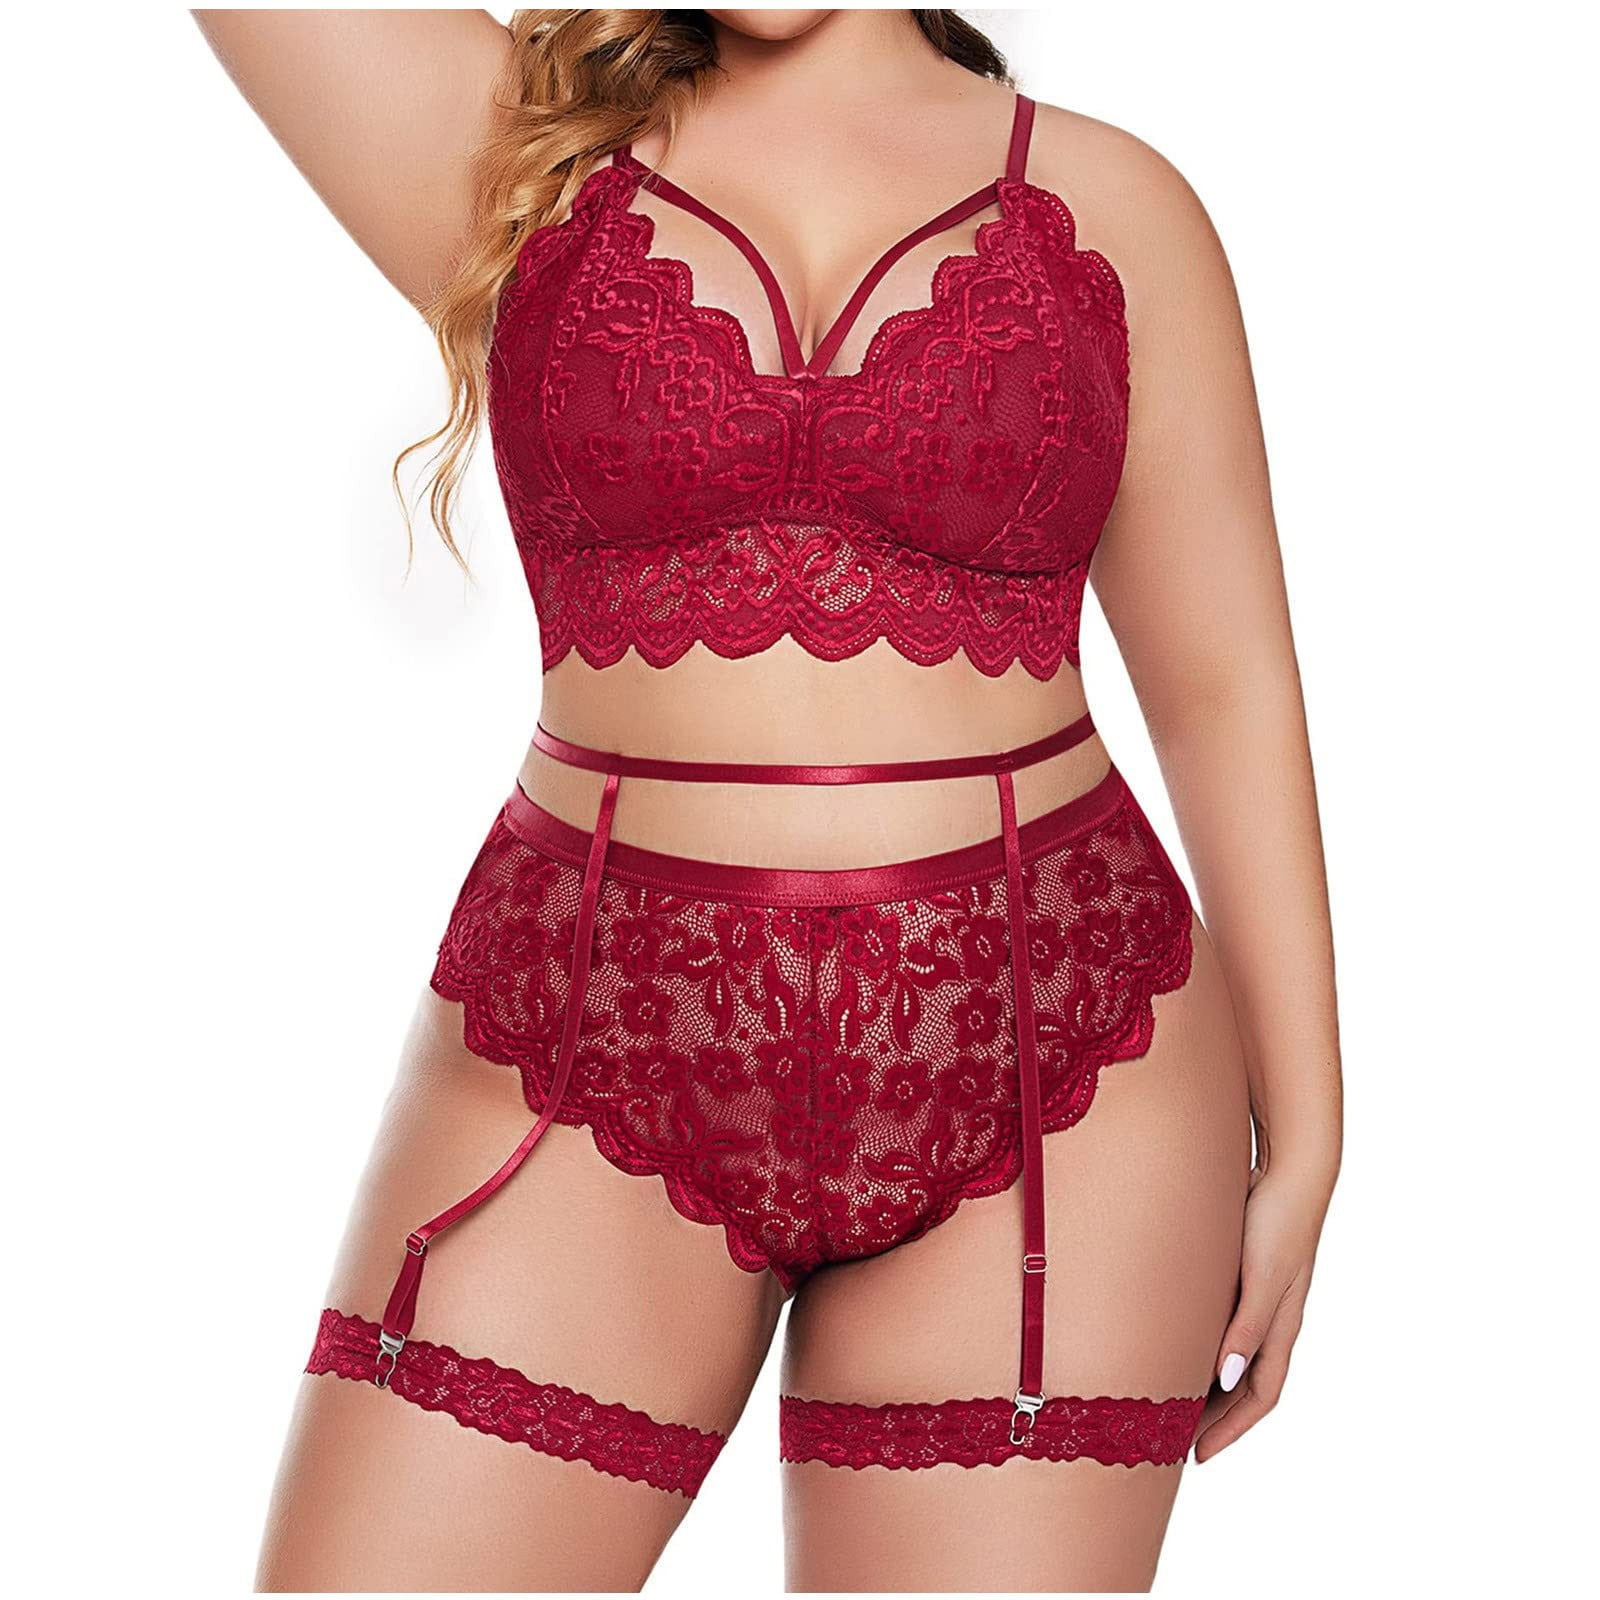 Plus Size Red Sheer Blossom Lingerie Babydoll & G-String - Red - 1X/2X